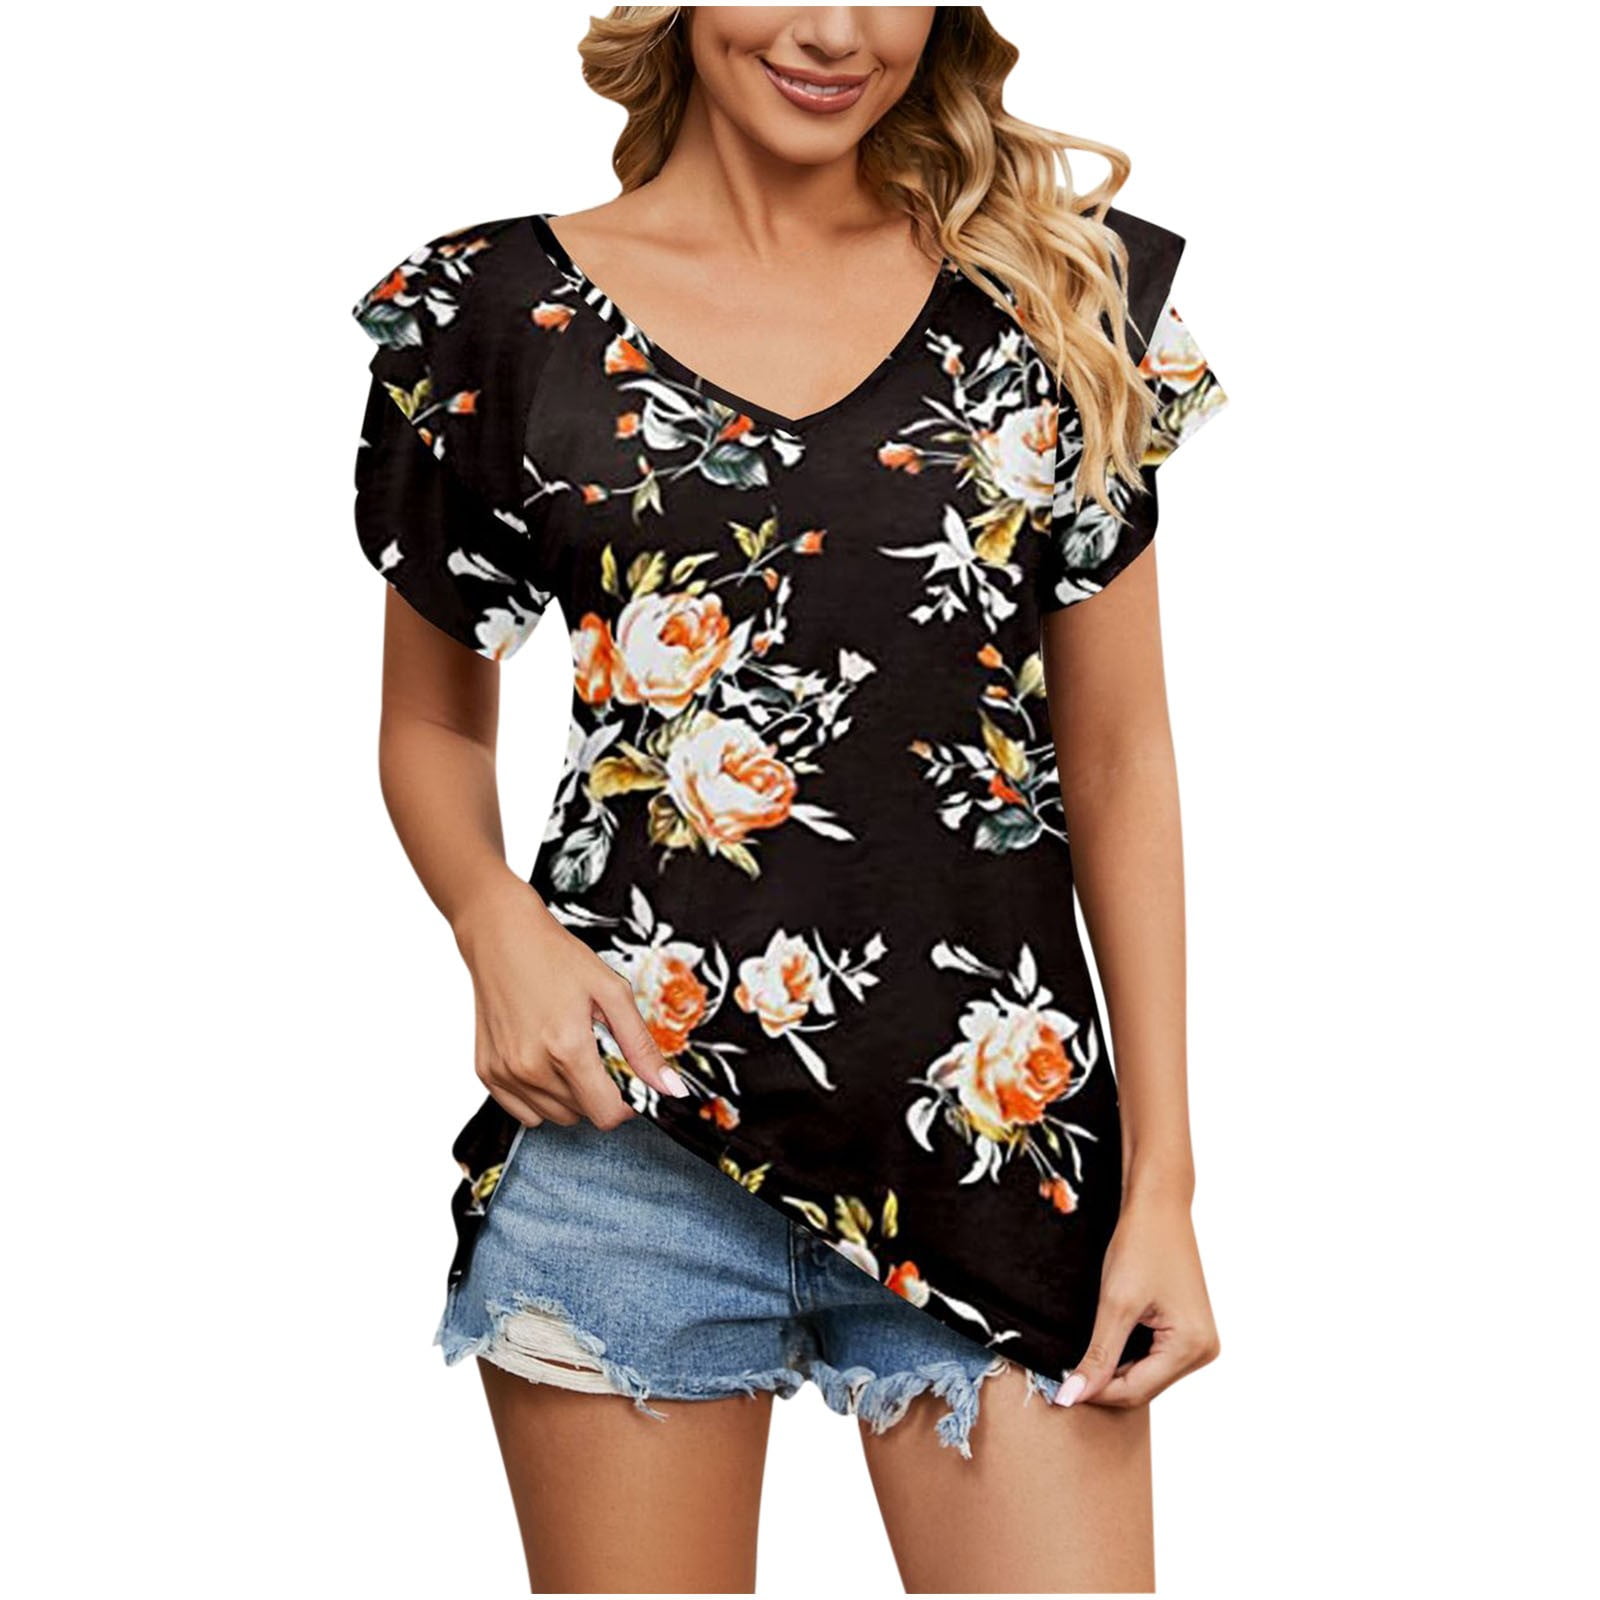 XFLWAM Womens Long Sleeve Tops Shirts Dressy Casual V Neck Floral Print  Graphic Tee Cute Holiday Blouses Pullover Black L 